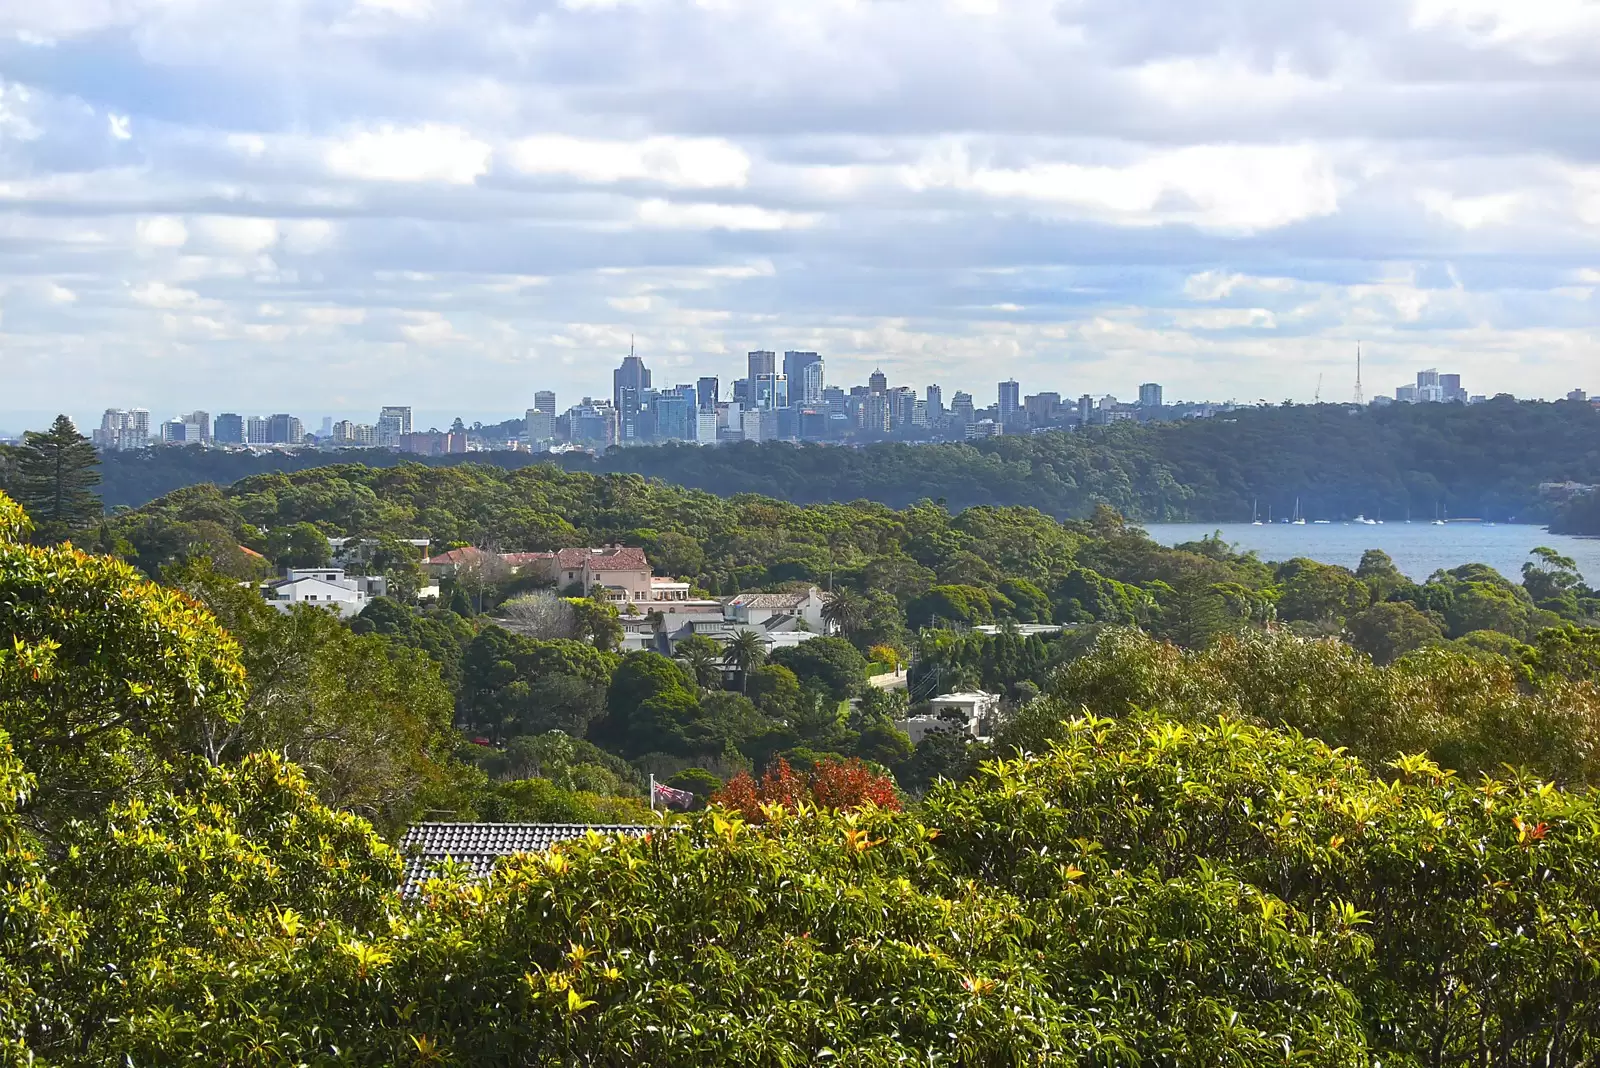 Photo #25: 23 Serpentine Parade, Vaucluse - Sold by Sydney Sotheby's International Realty